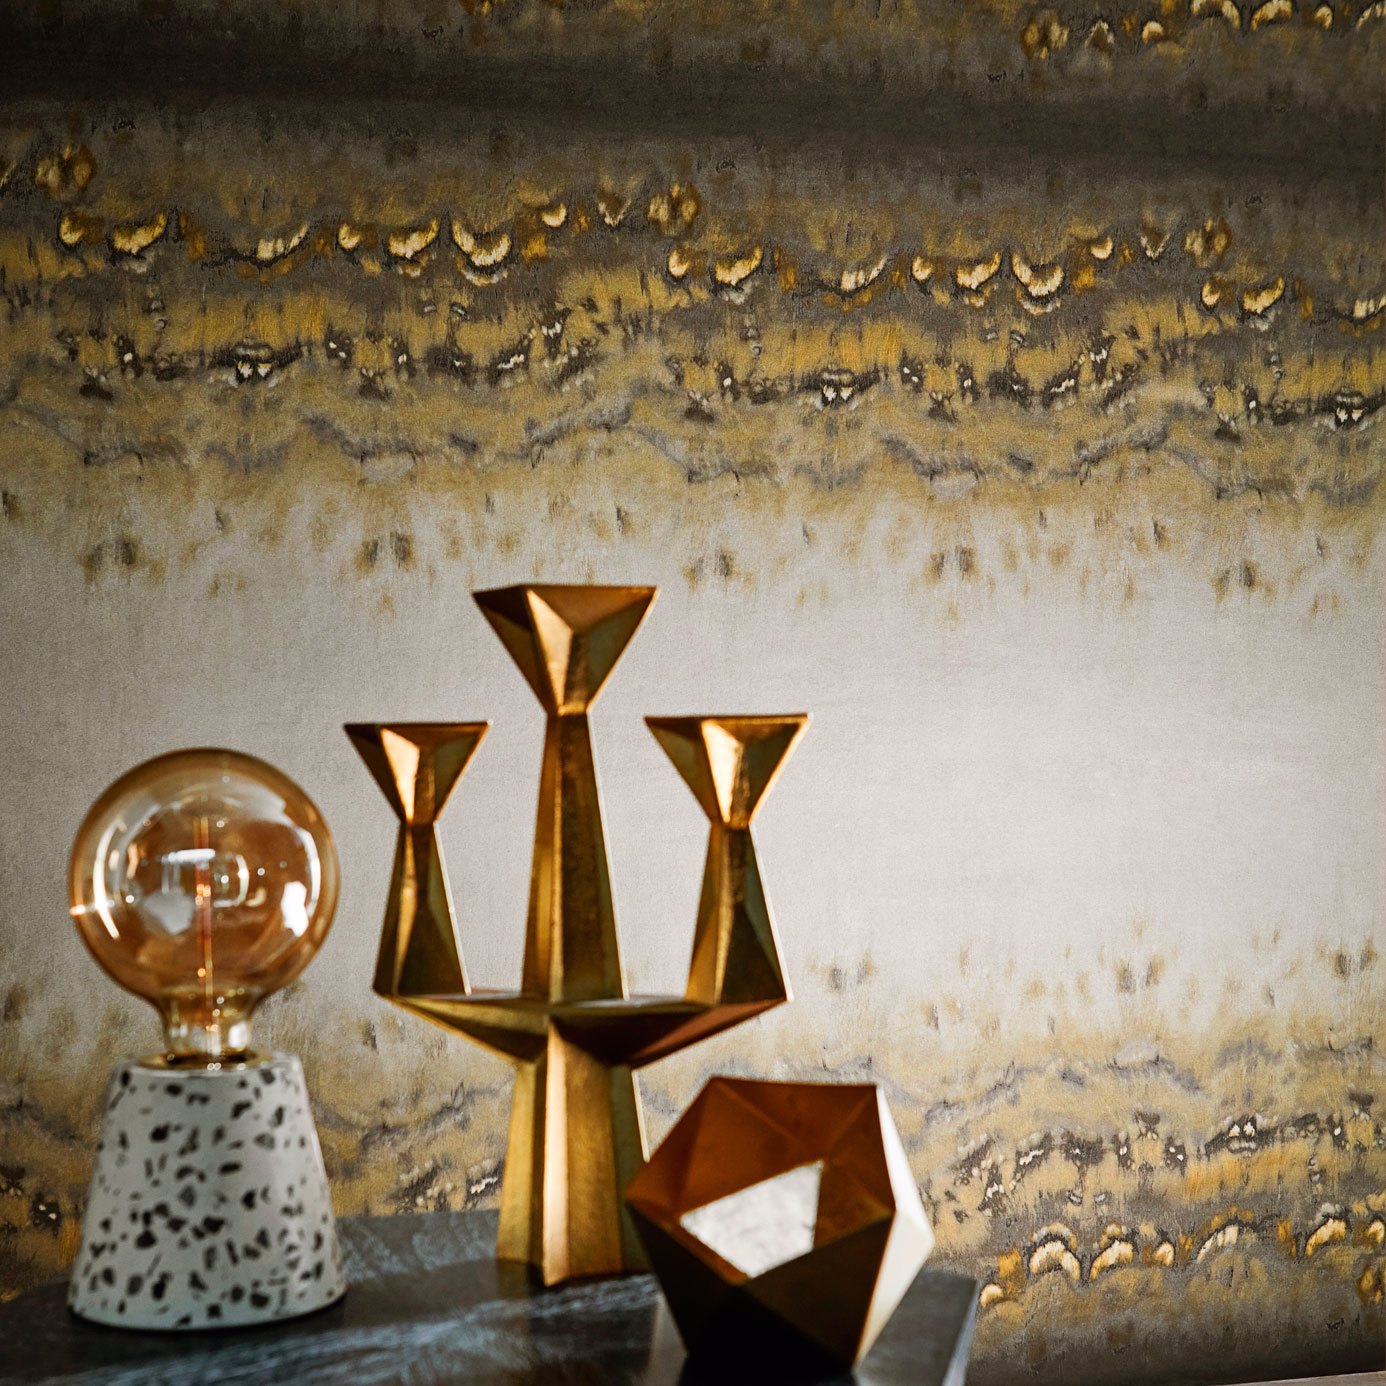 Anthology Diffusion Topaz Wallpaper by HAR